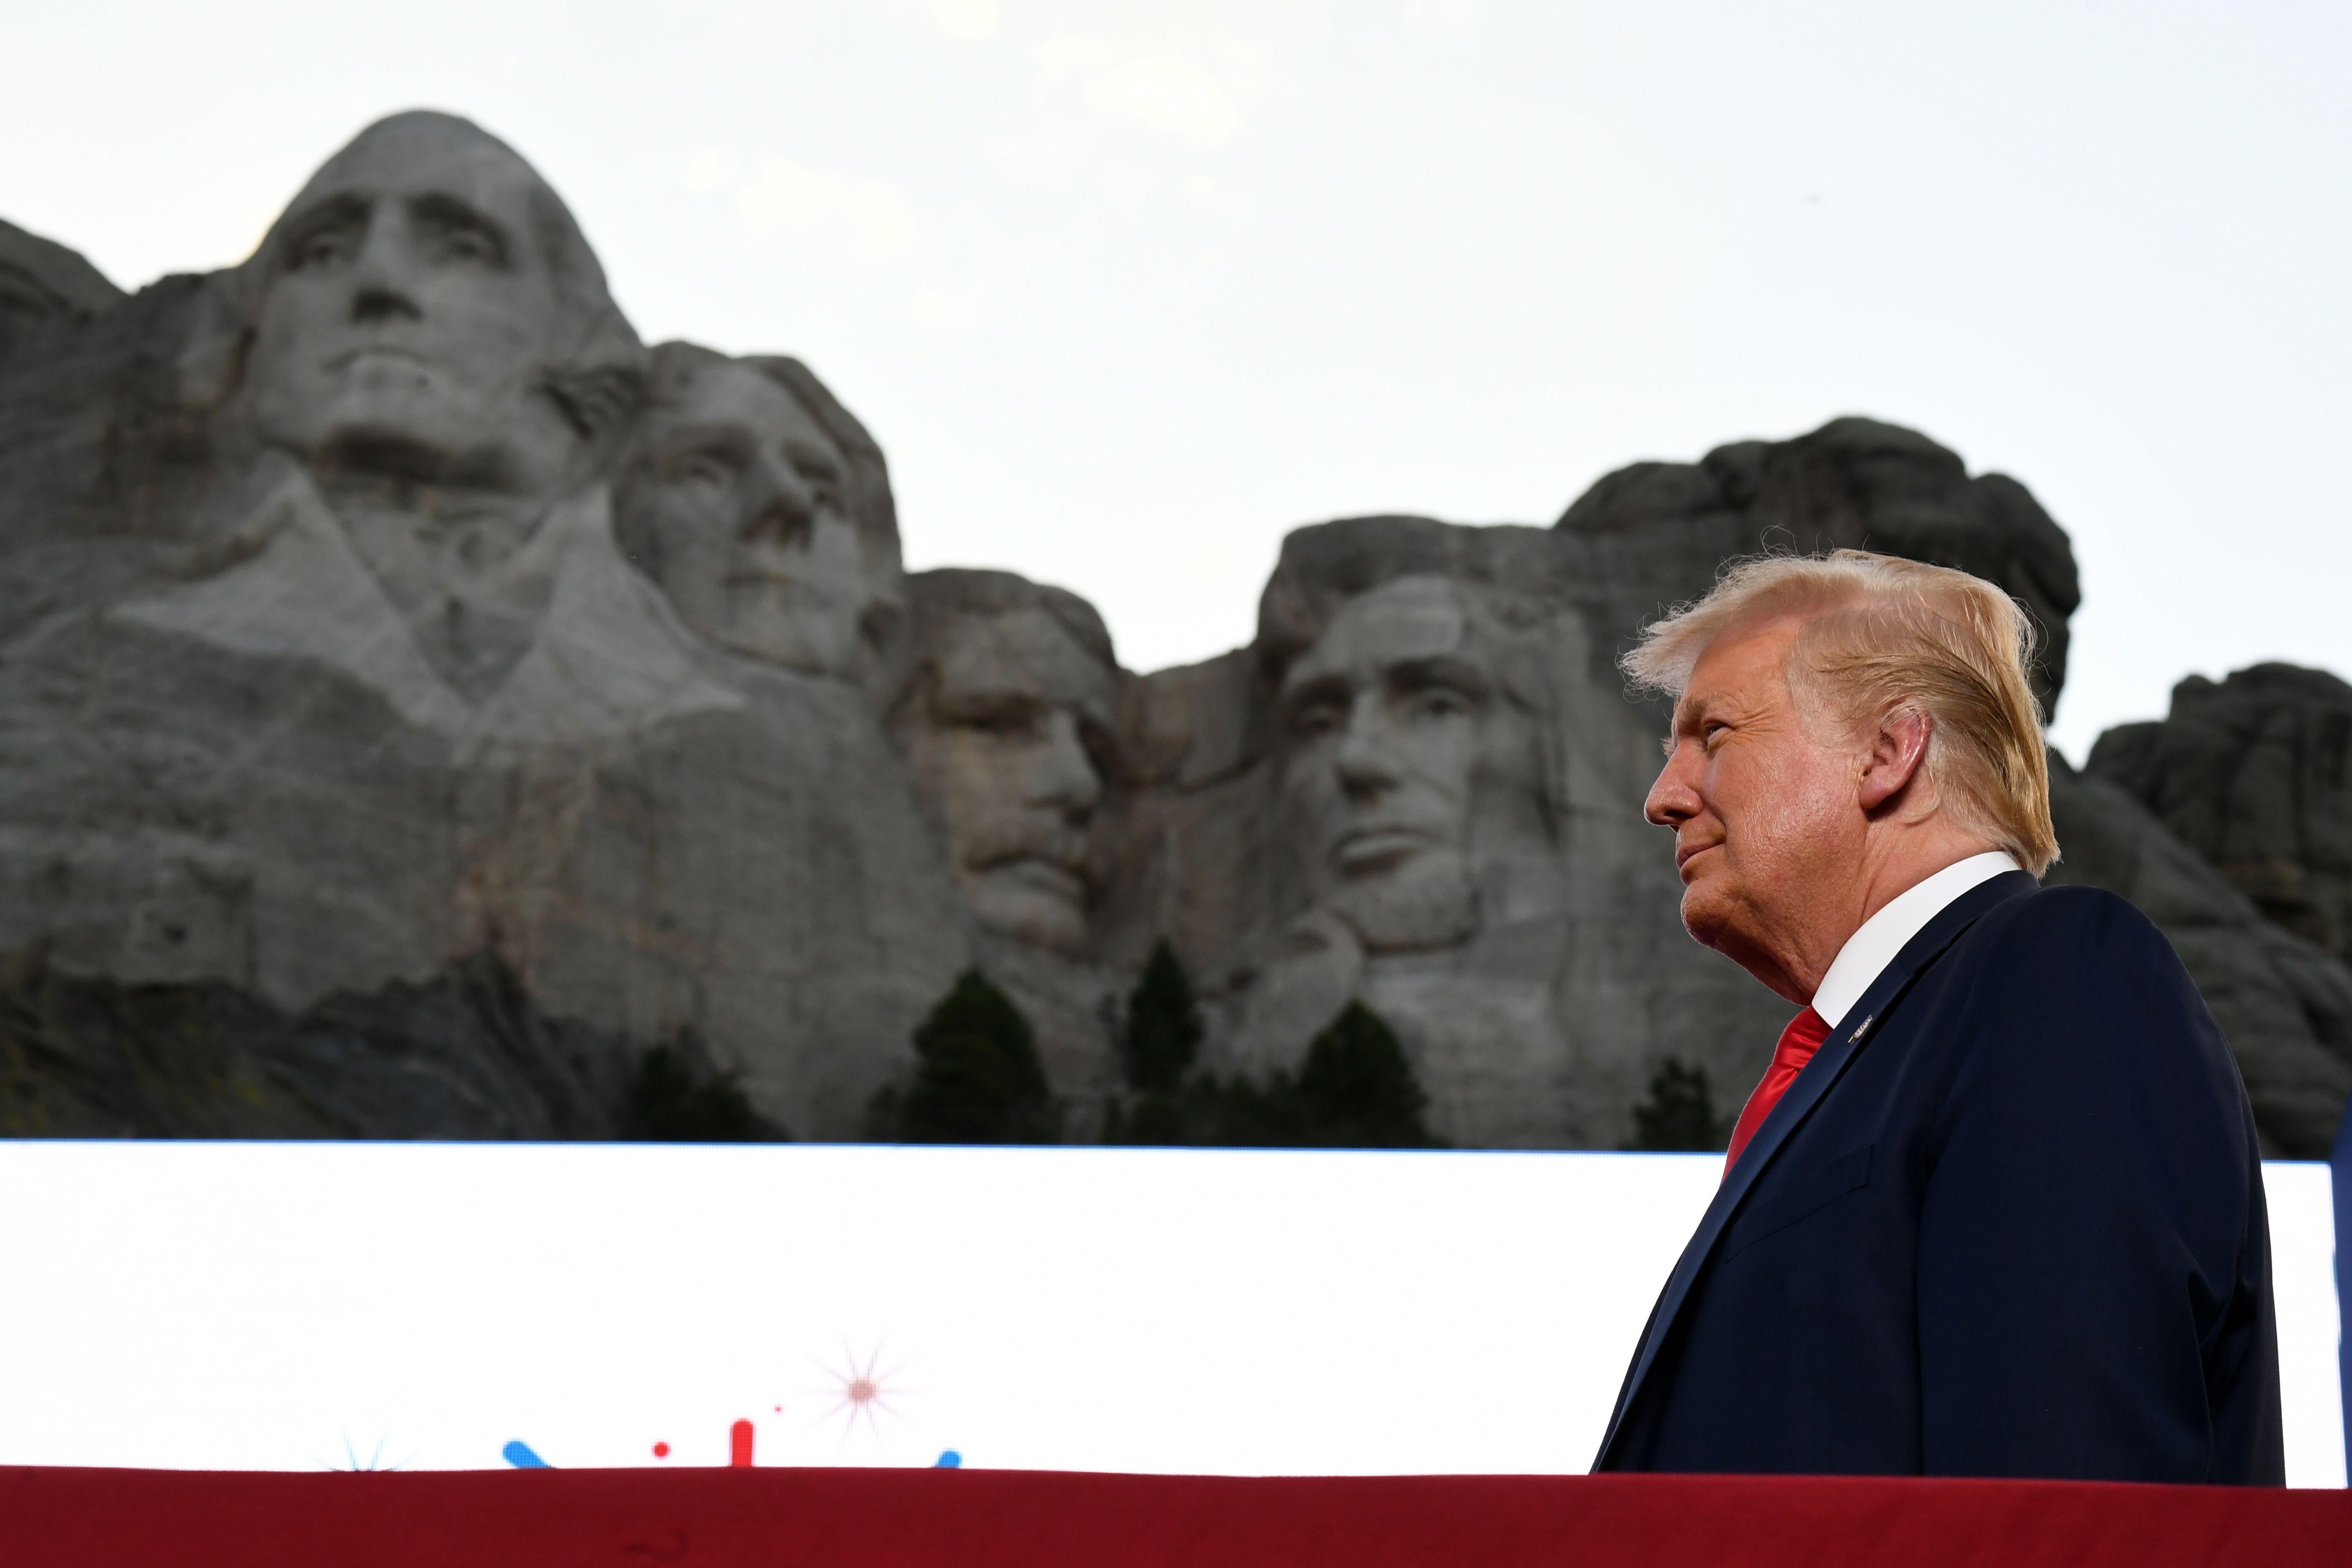 Trump is seen in front of Mount Rushmore.